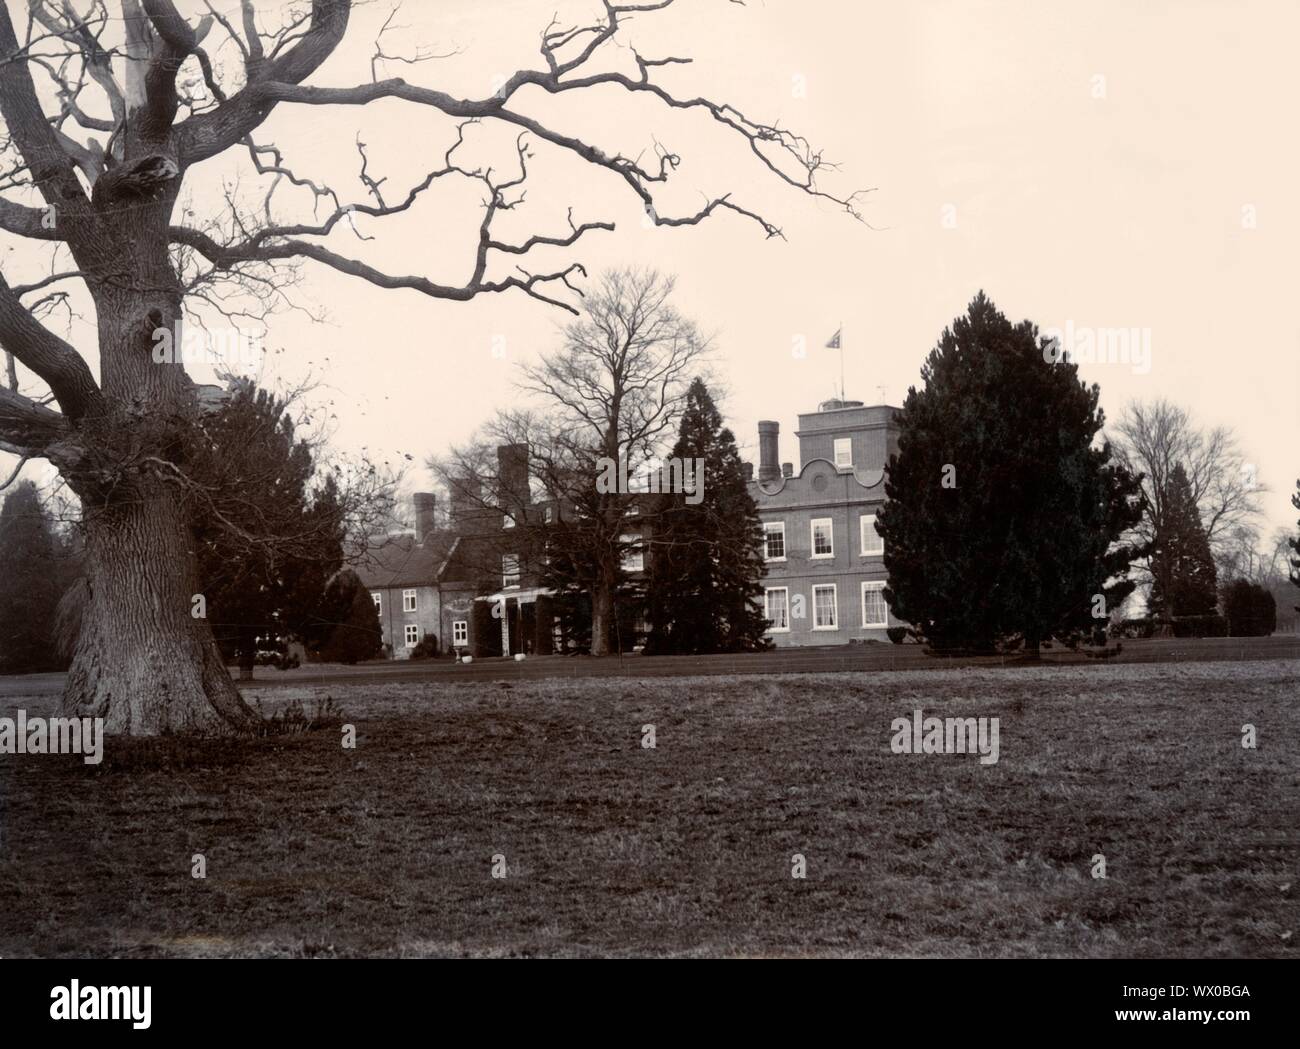 Brettenham Park, Suffolk. Undated photograph of Brettenham Park which was first established in 1247.  A note on the back claims: 'Formerly Prince Jerome Napoleon resided here'. The house was let to him some time before 1847. In 1902 the estate changed hands and became the home of Colonel Sir Thomas Courtenay Theydon Warner, 1st Baronet. The Hall and Park were sold to Old Buckenham Hall School in 1956. Stock Photo